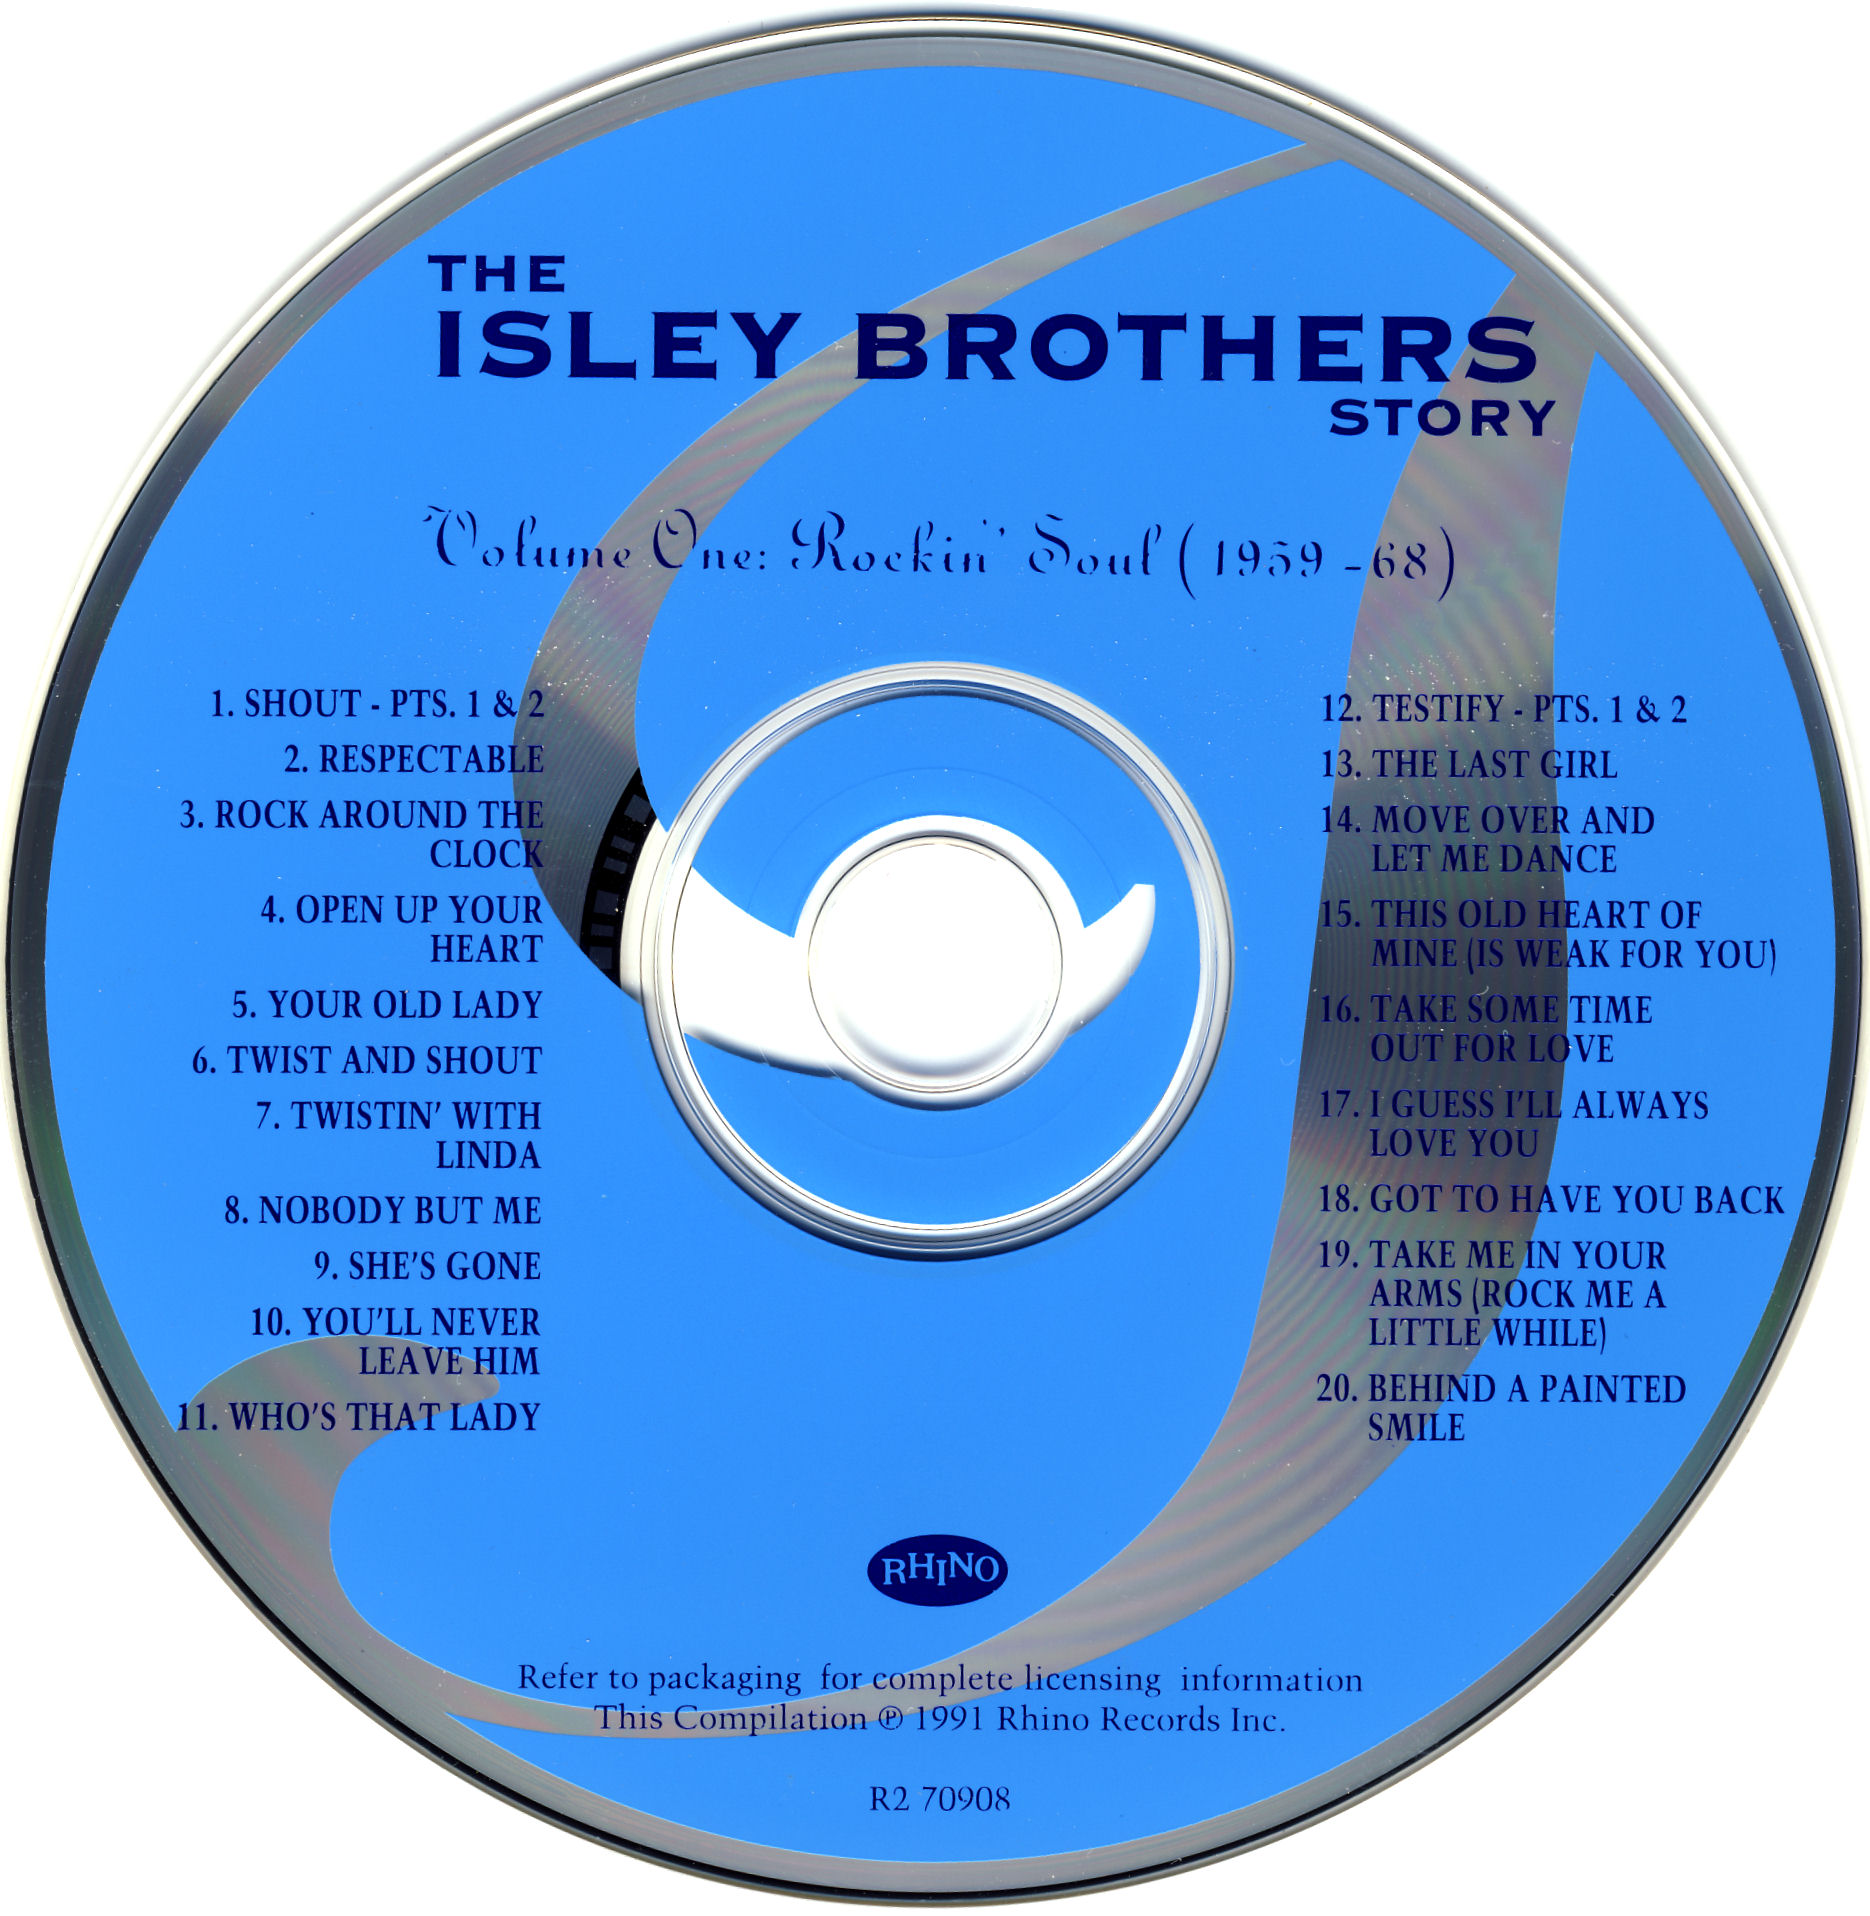 Isley Brothers - The Isley Brothers Story Vol. 1 Rockin' Soul 1959-1968 (1991)